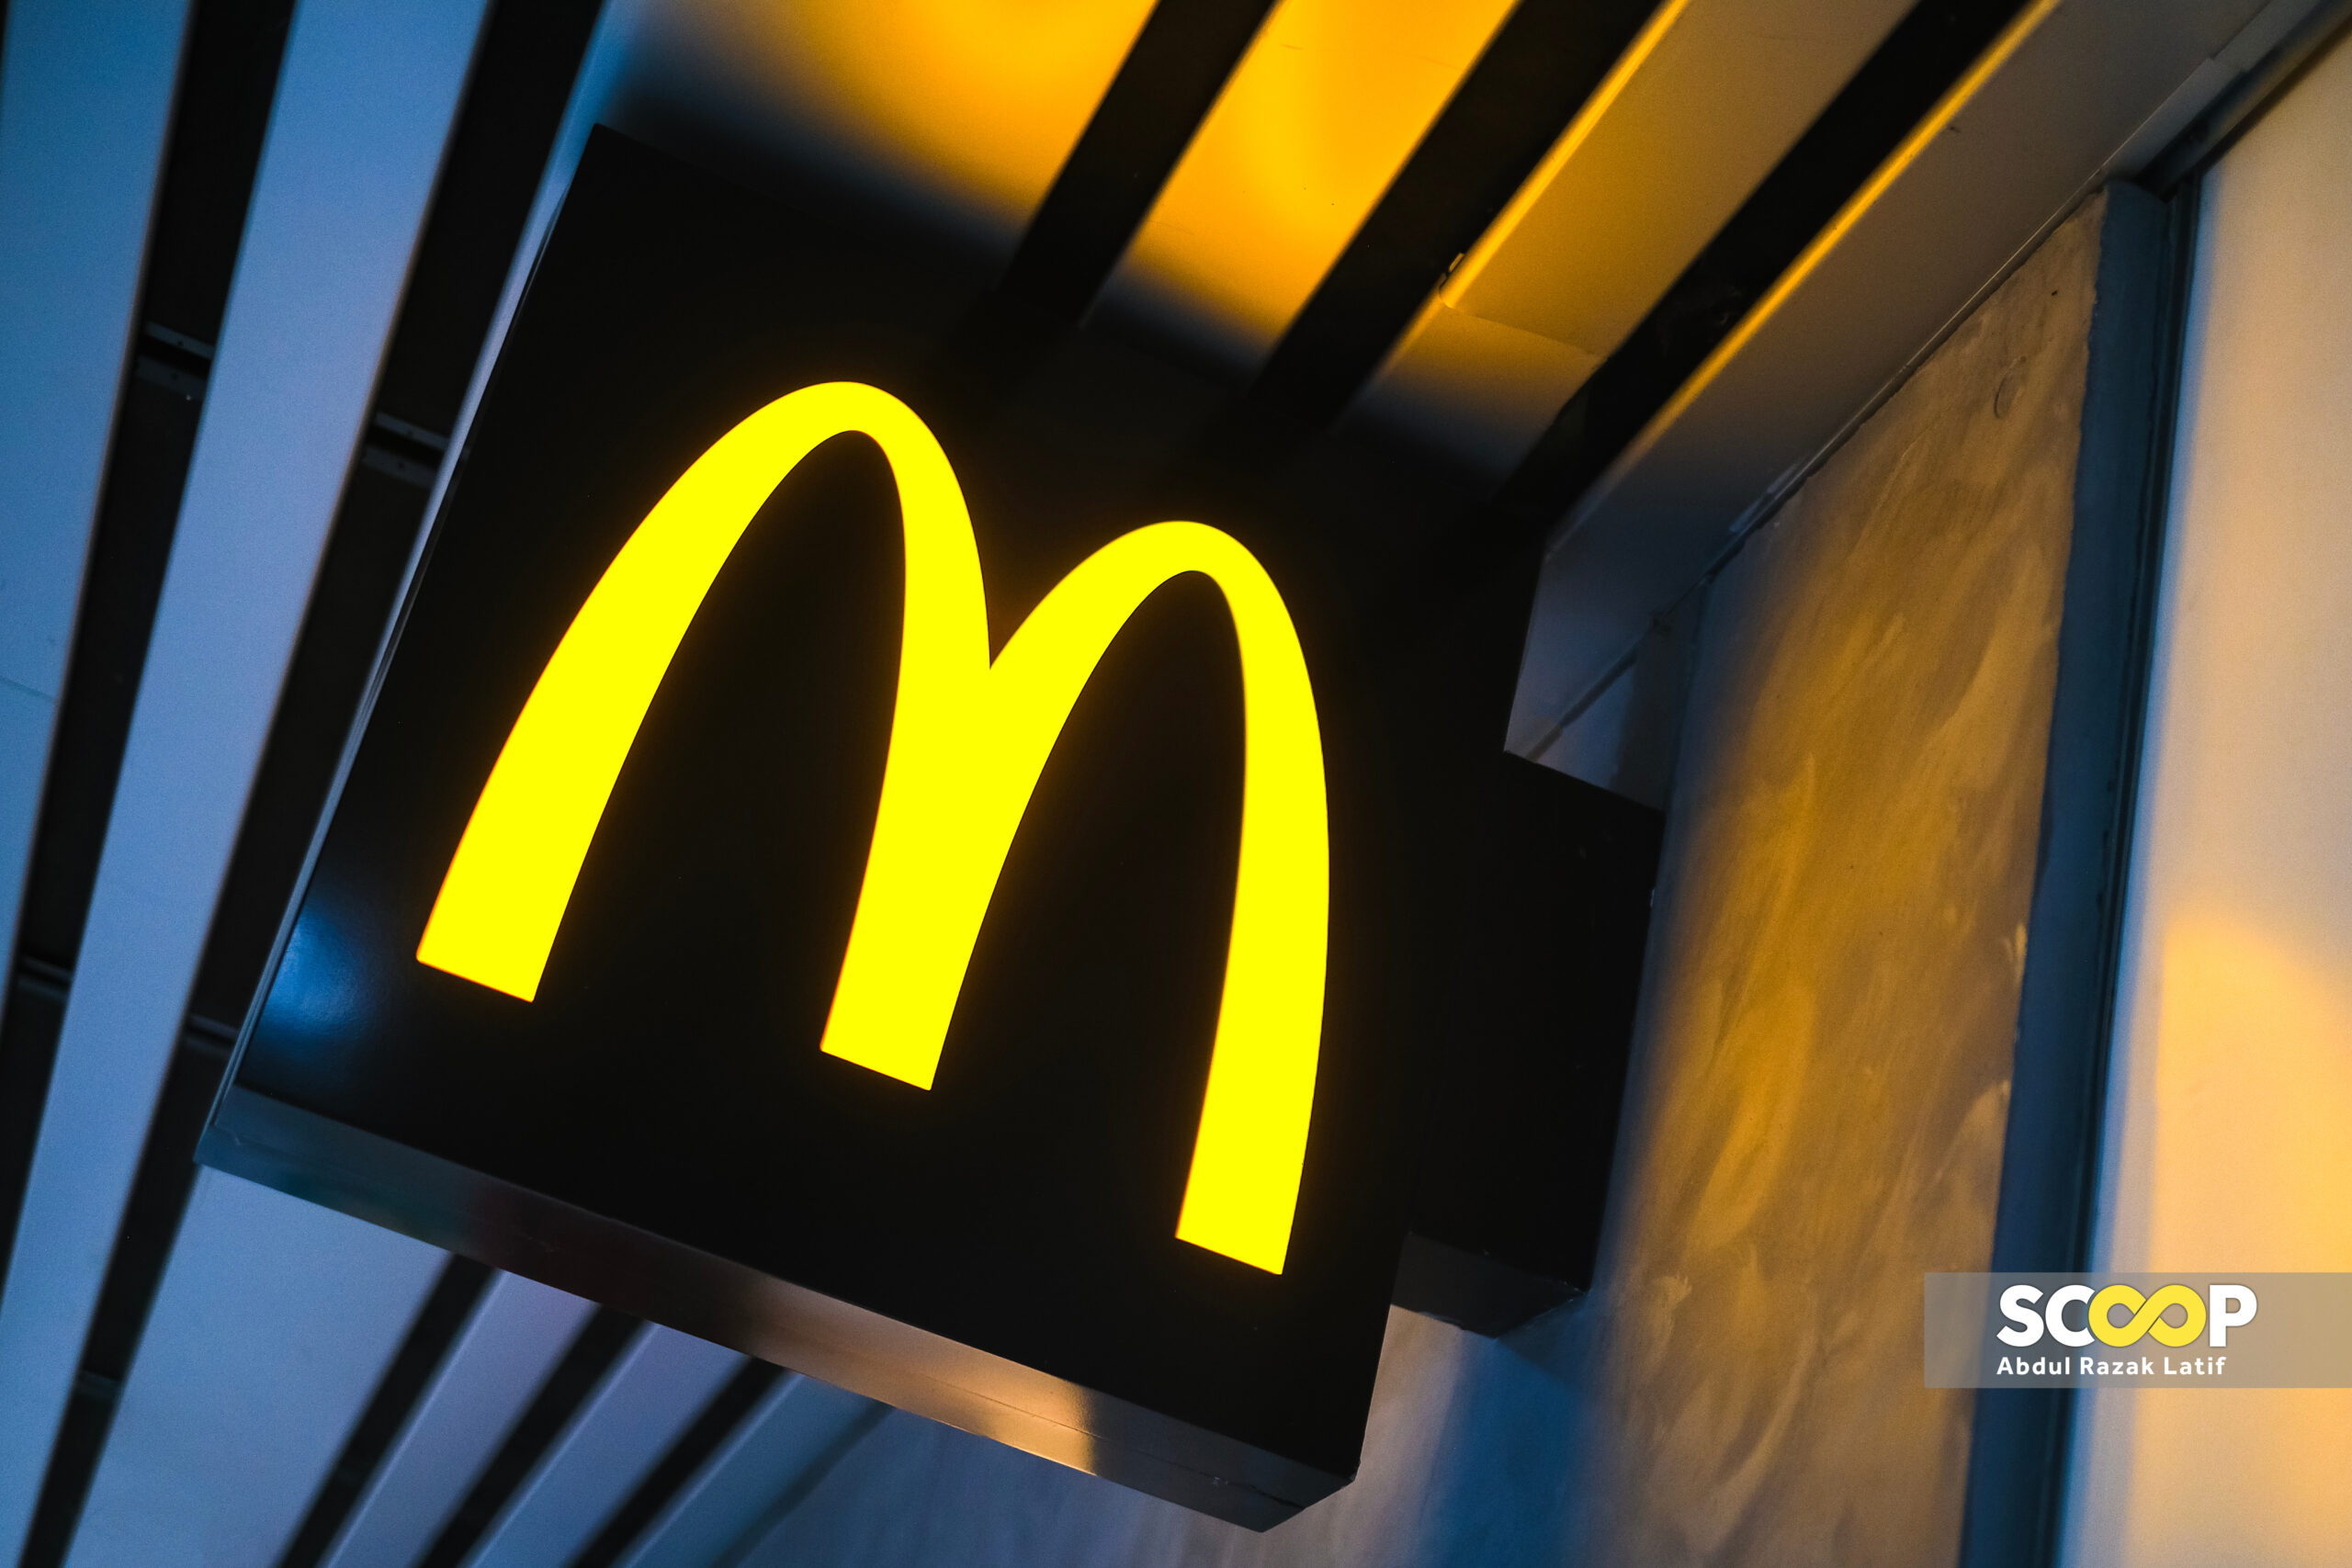 McDonald's vs BDS suit: resolution stalls over withdrawal terms